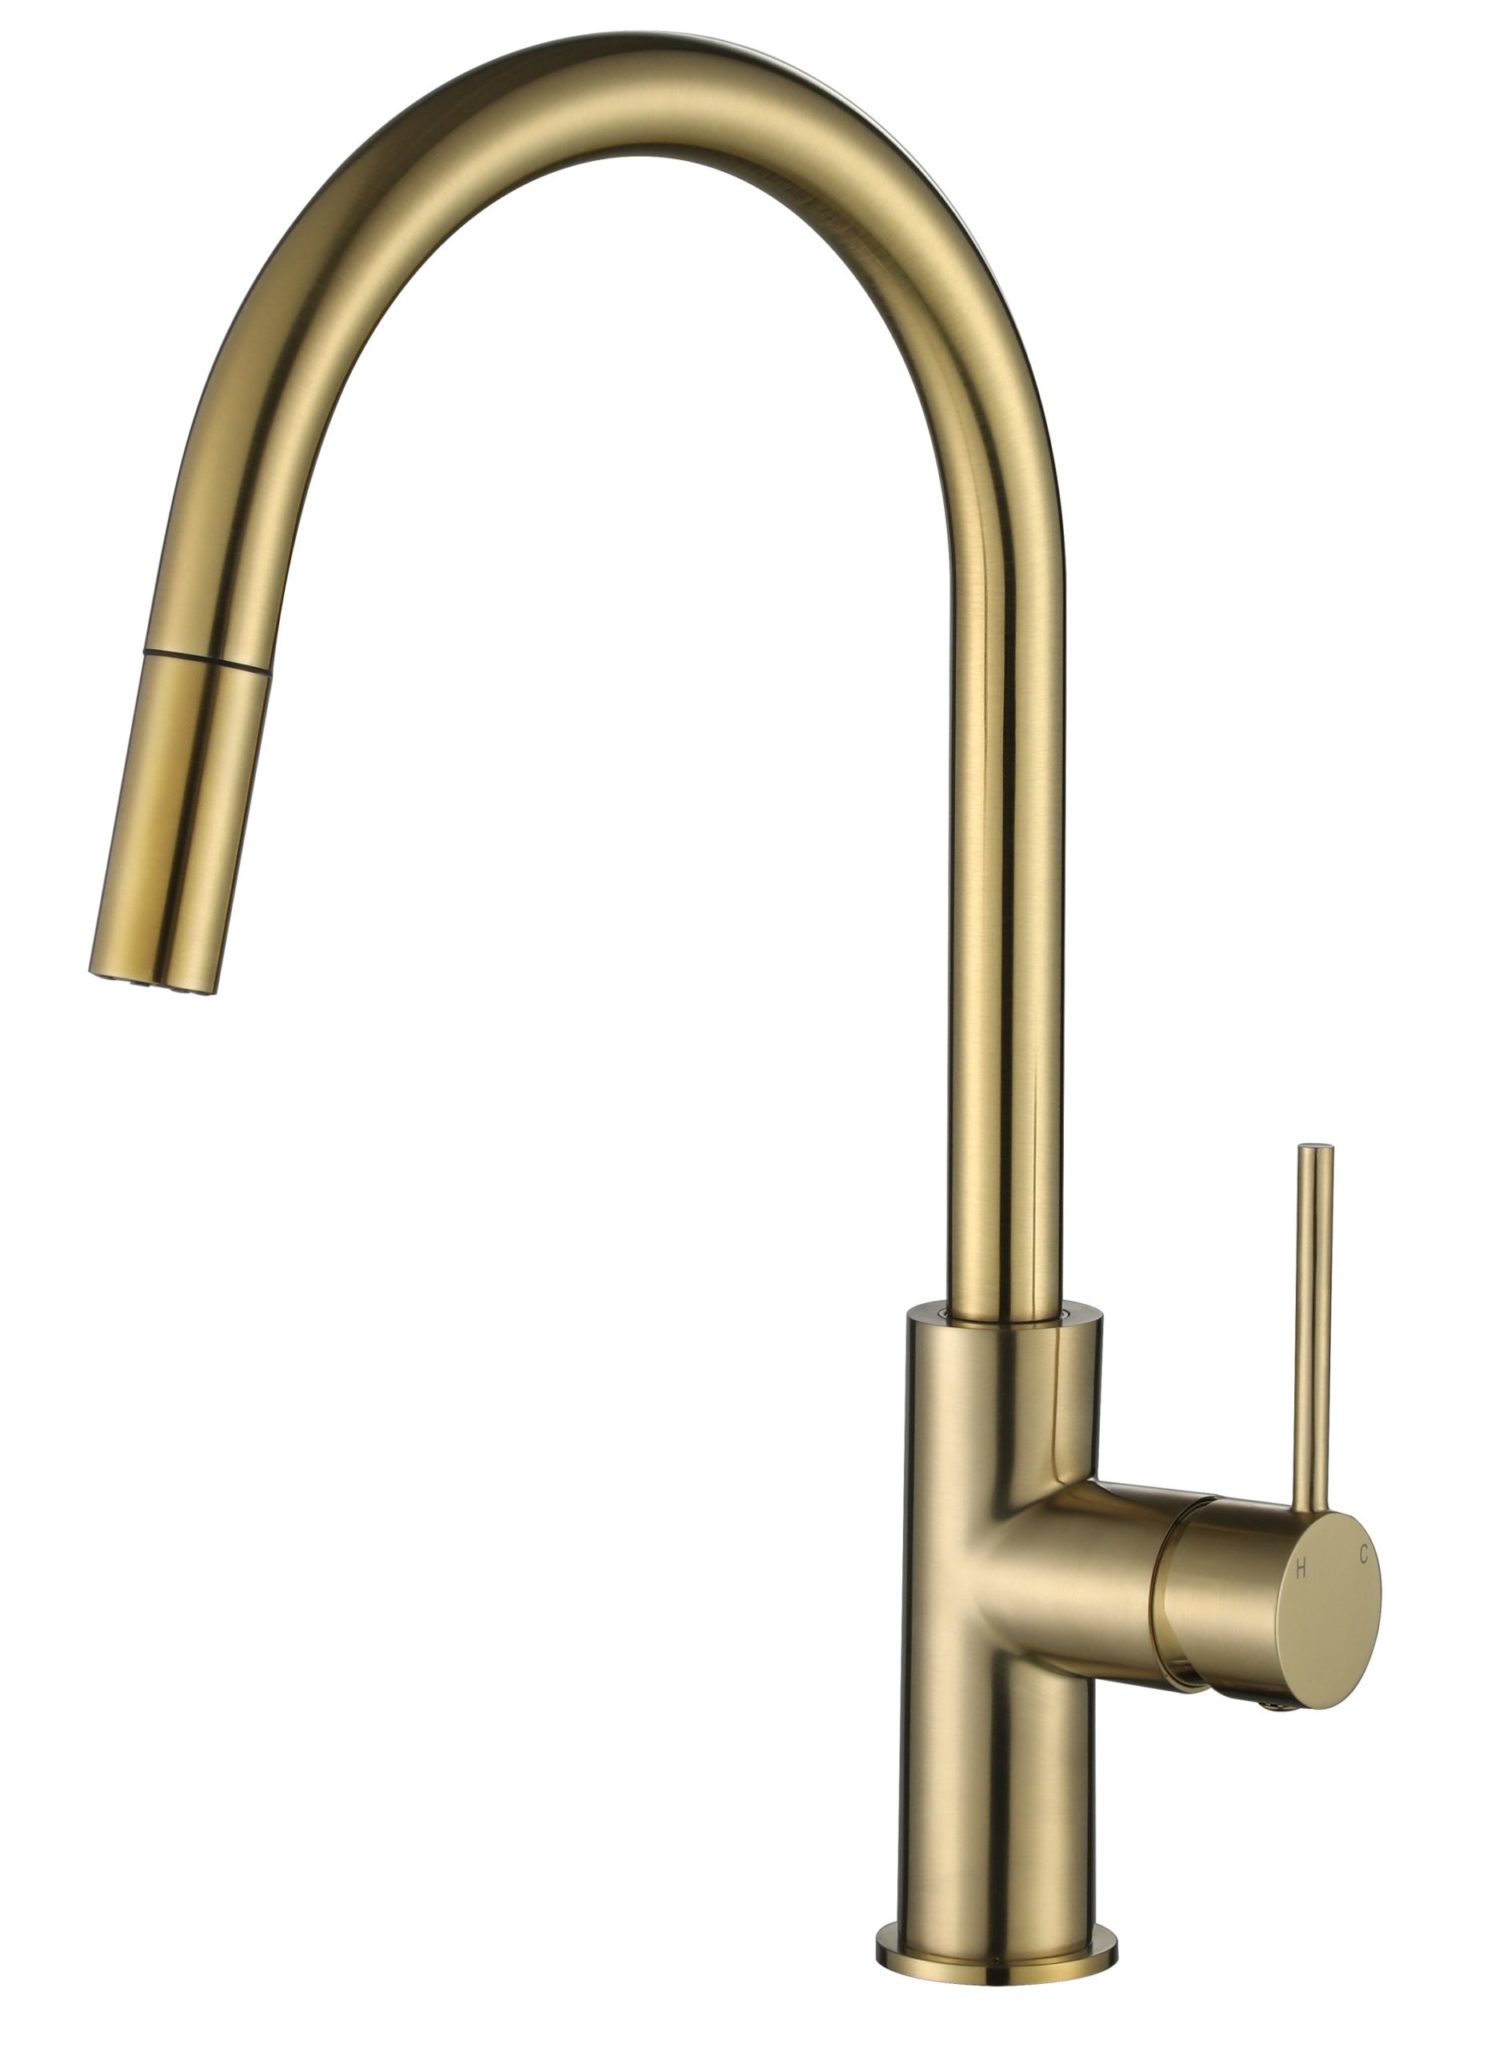 Modern Pull out Kitchen Mixer - Brushed Brass - Flooring Bathrooms